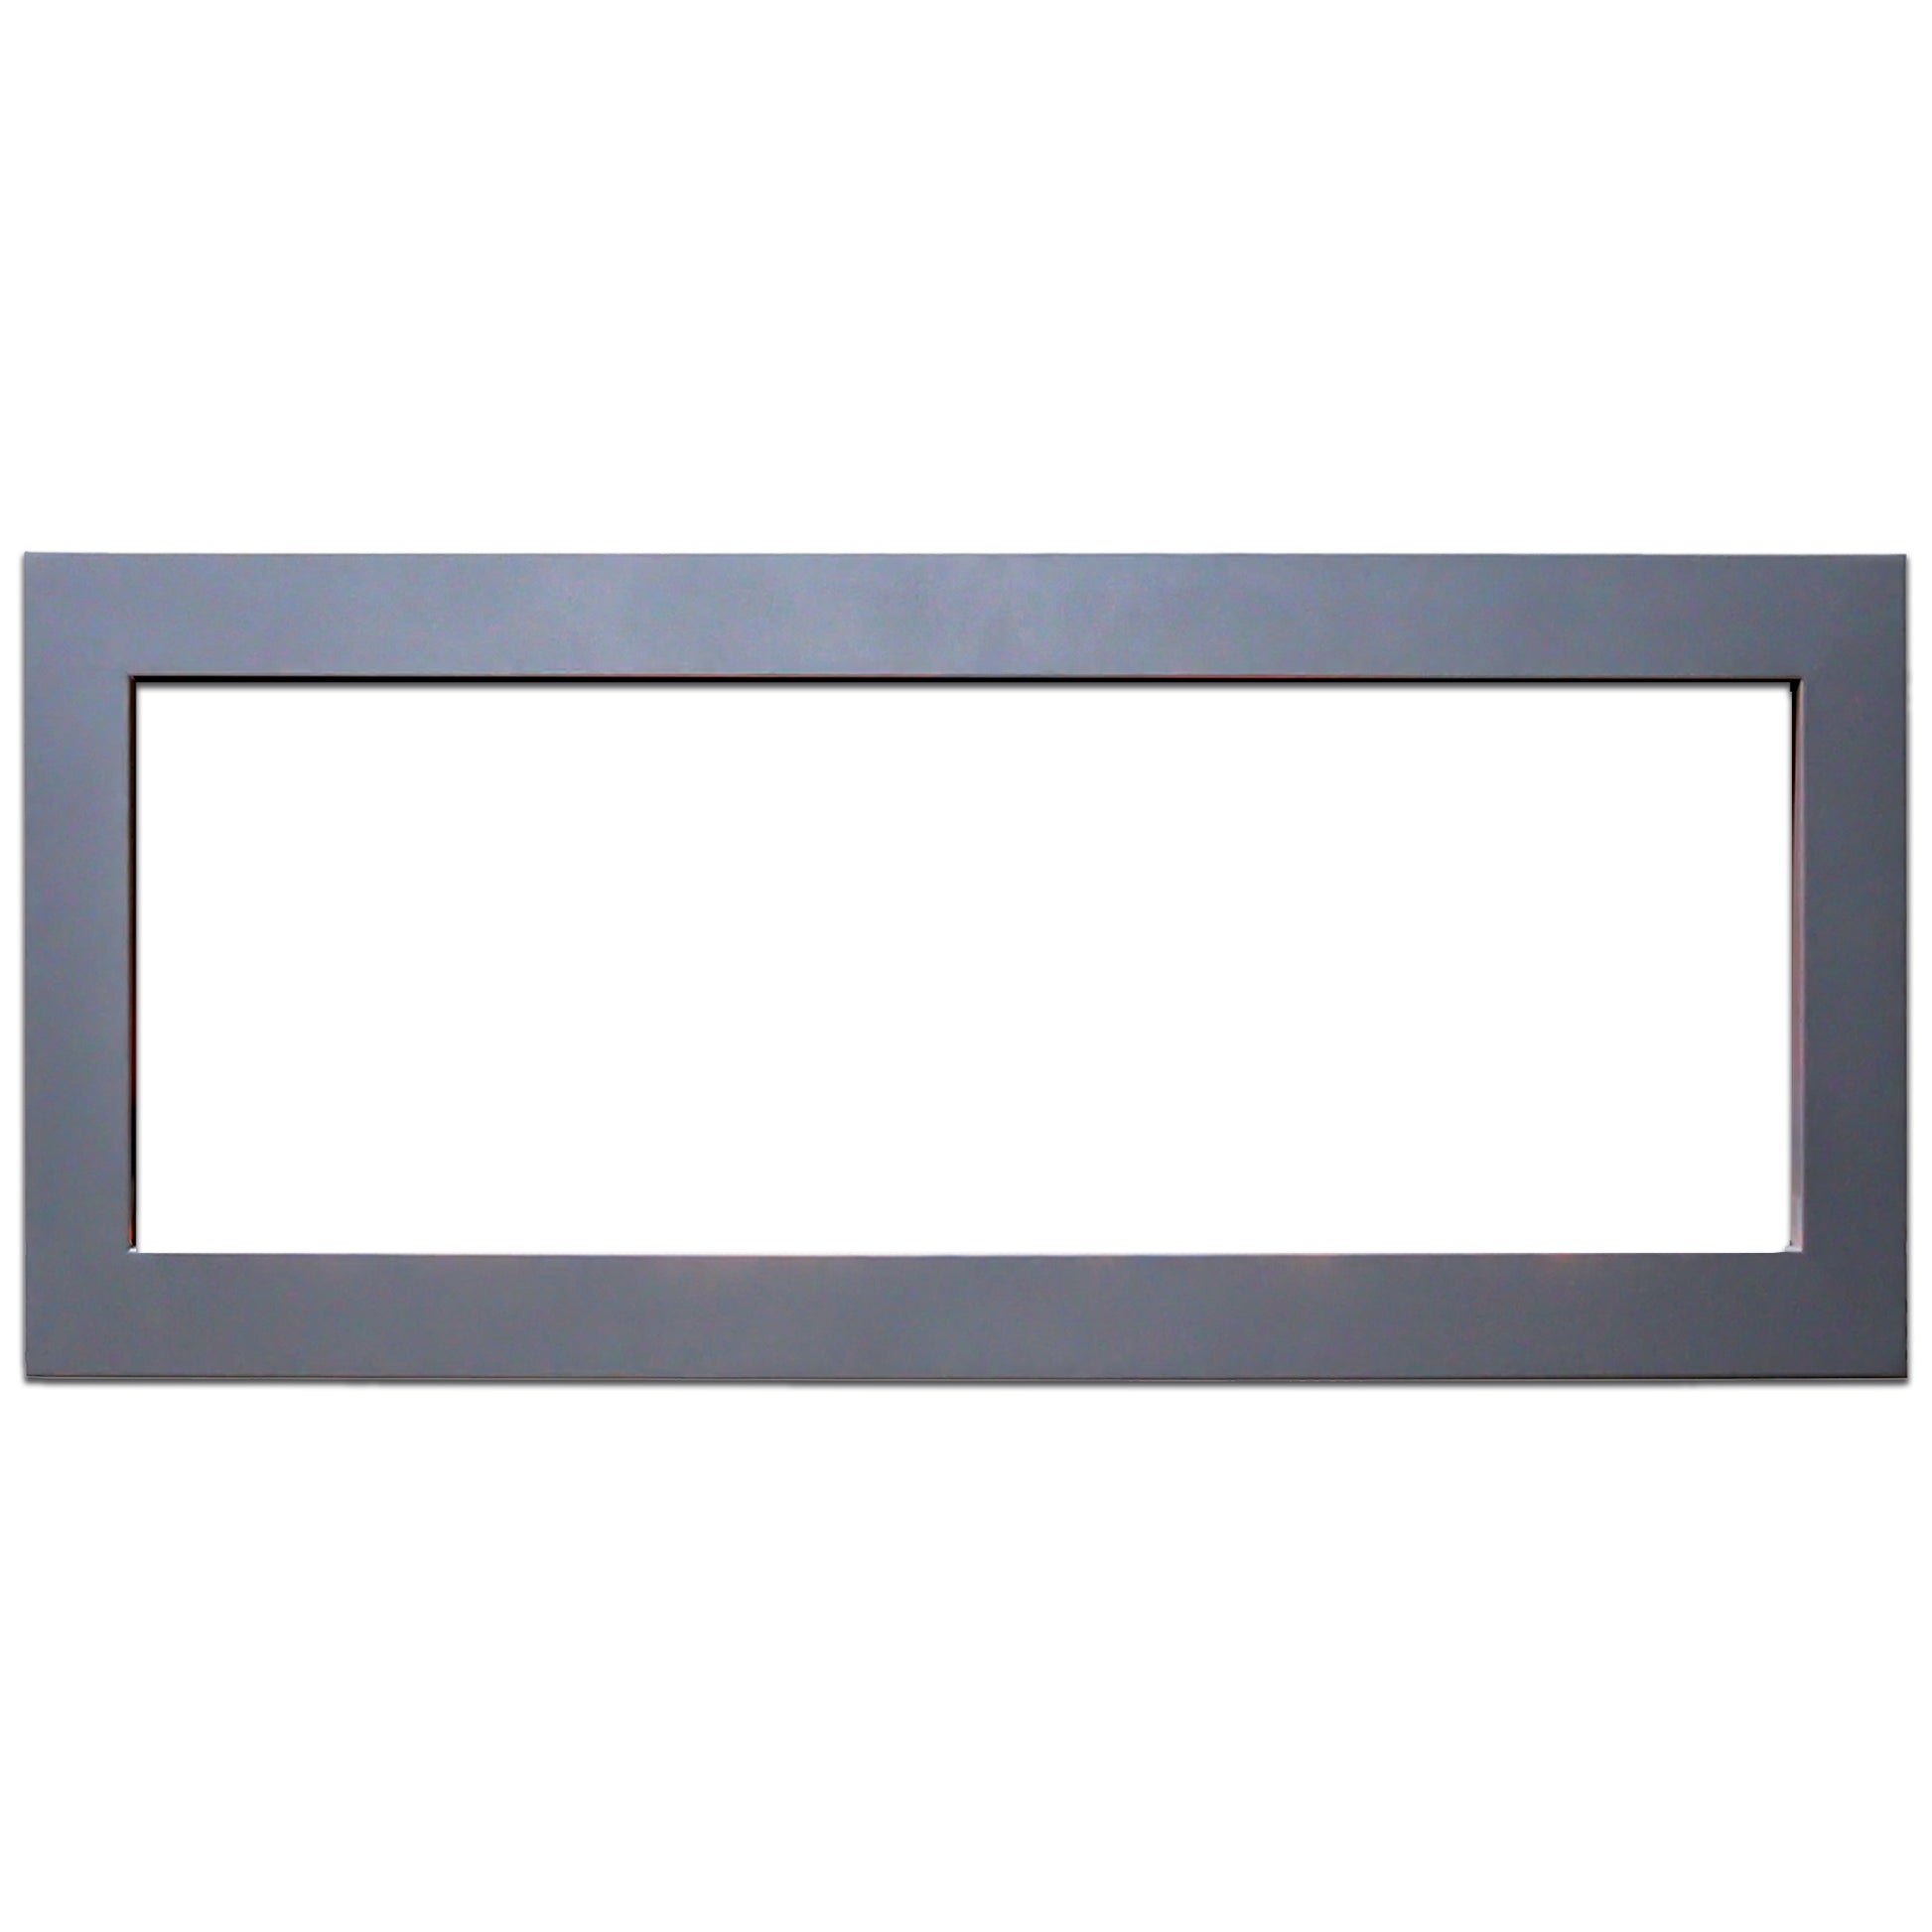 Zopaflame 48-in Electric Fireplace Silver Grey Trim Kit 